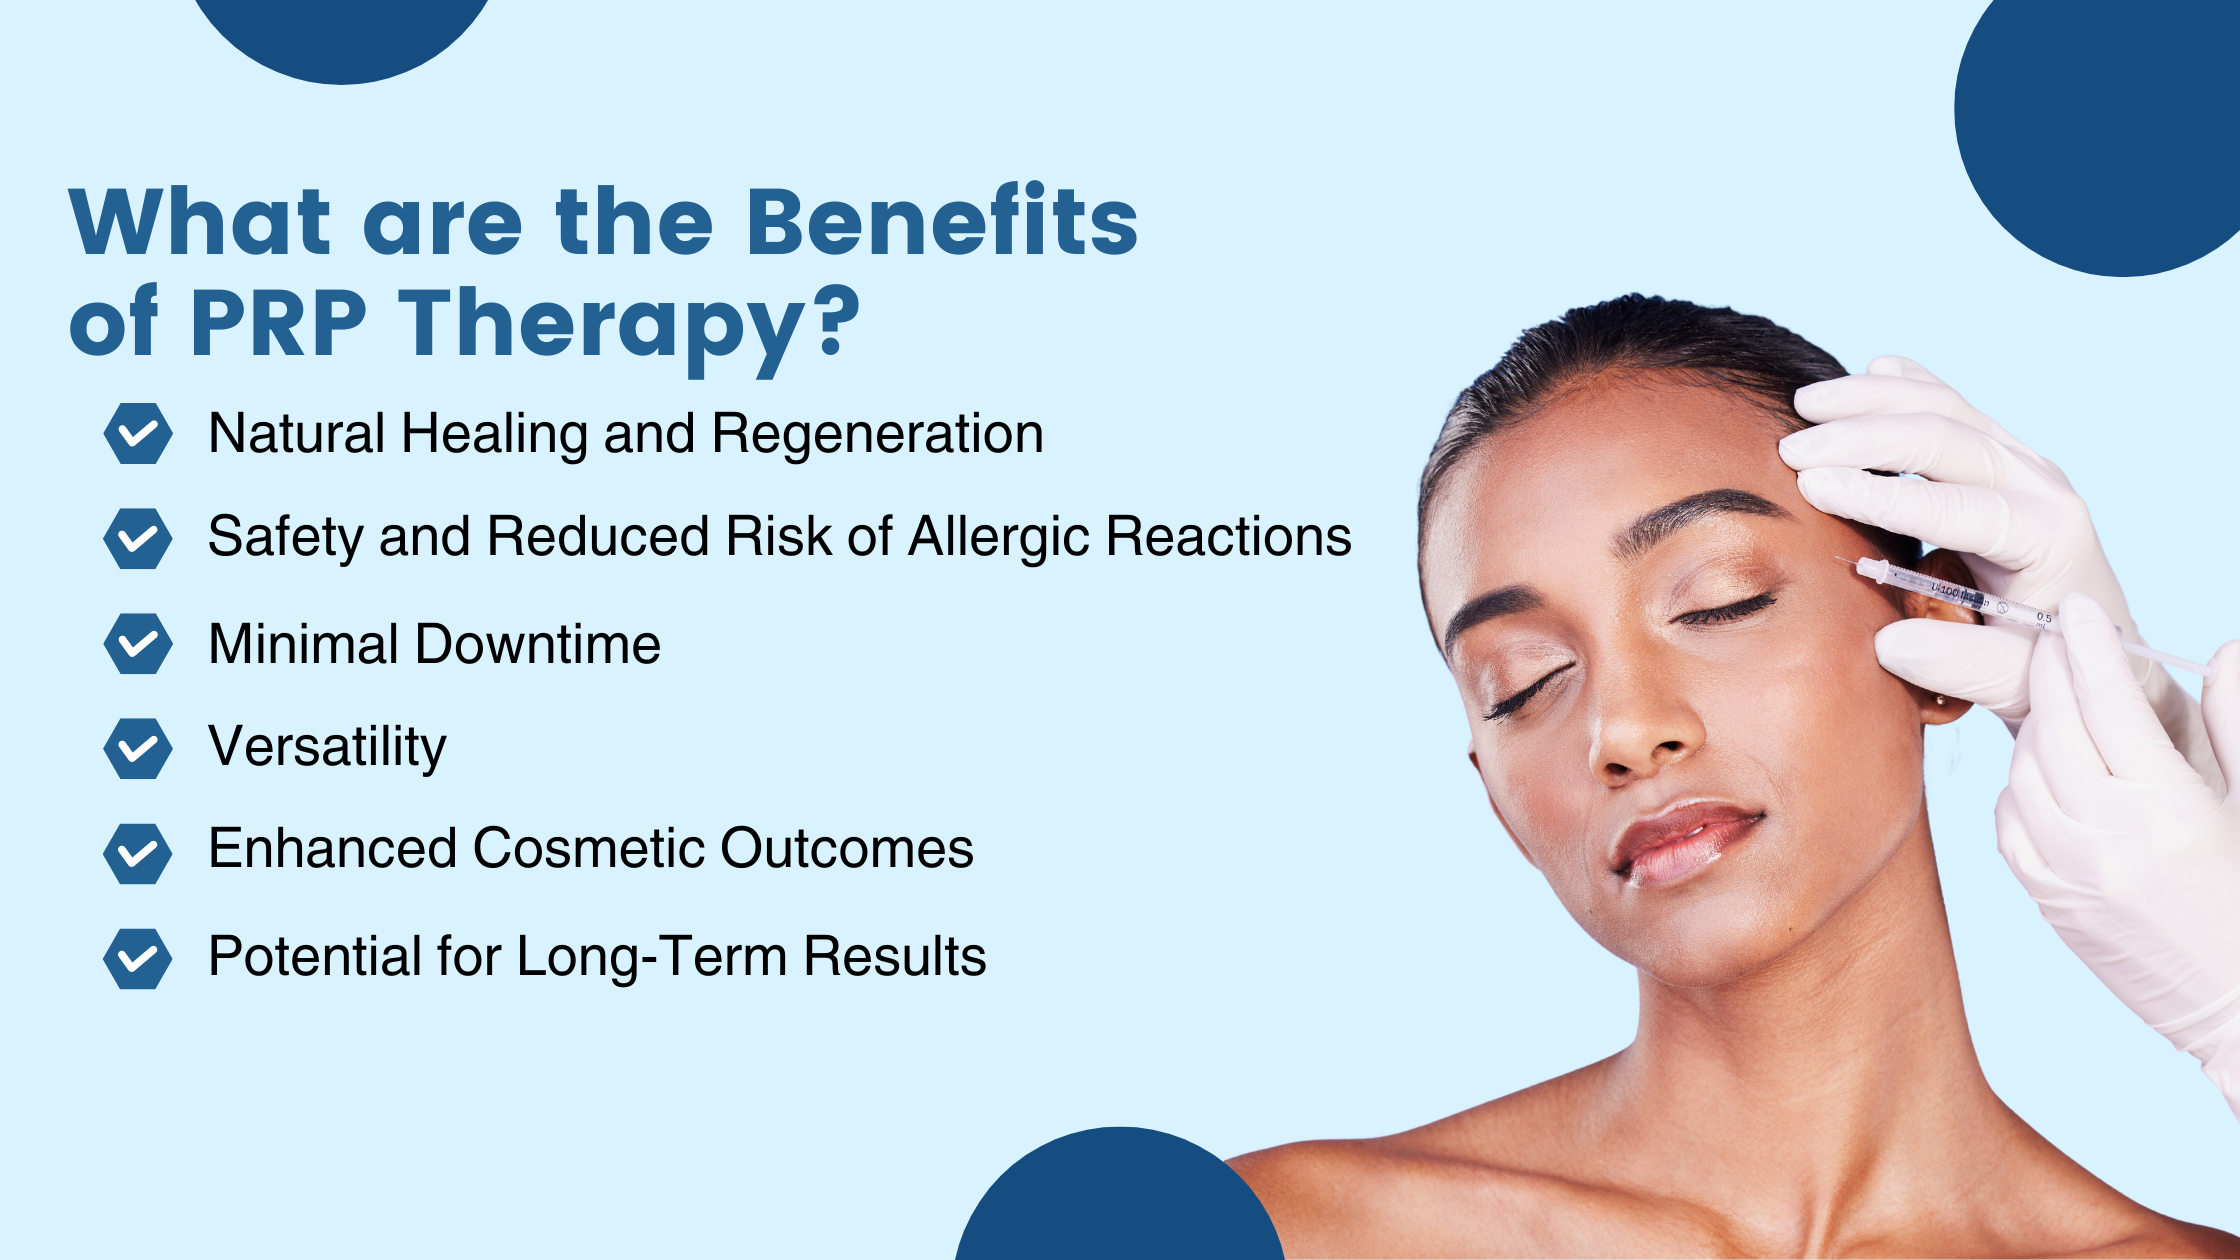 Benefits of PRP Therapy